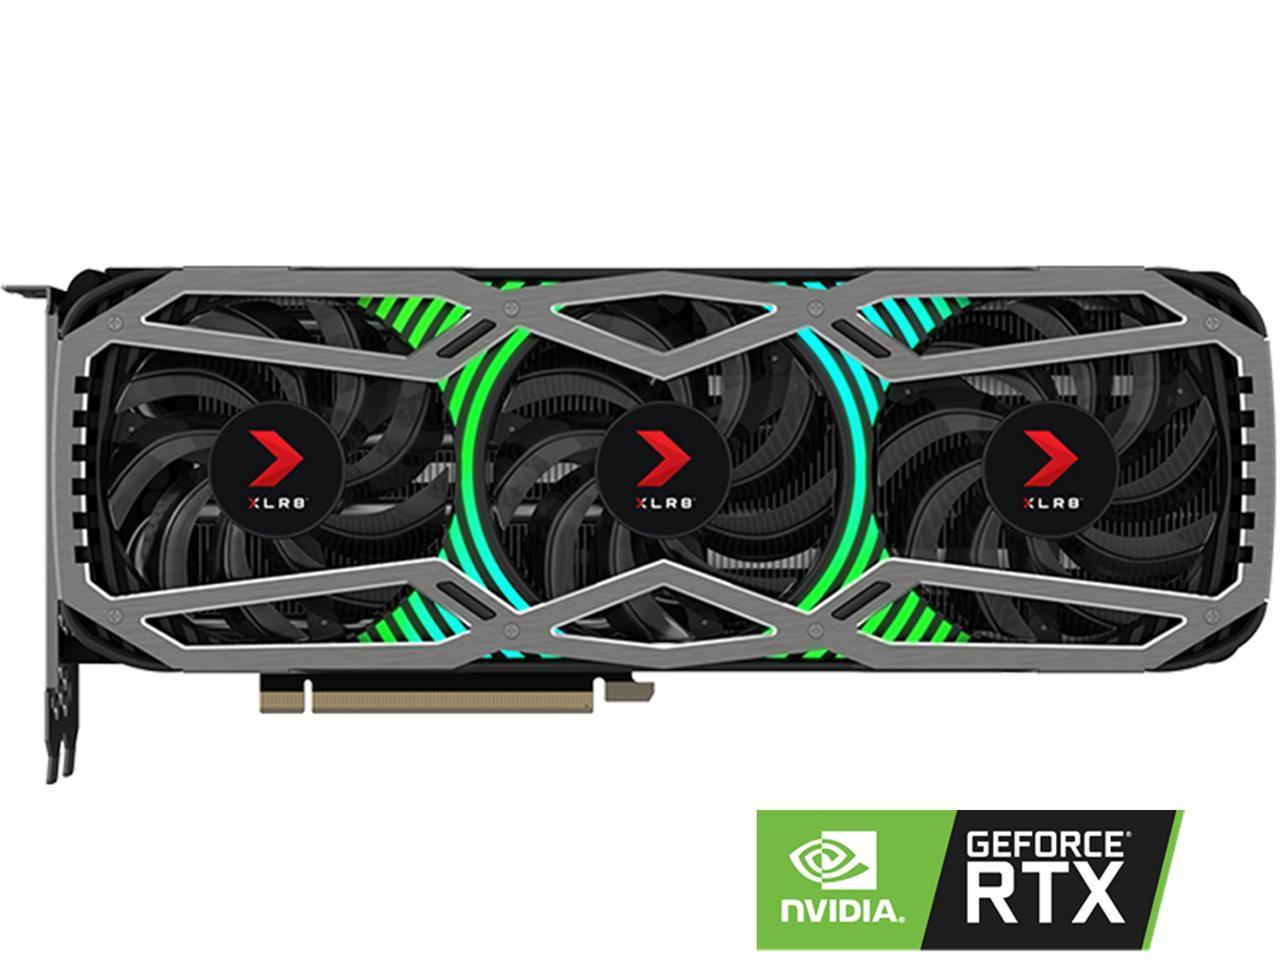 PNY GeForce RTX 3070 8gb XLR8 Gaming Revel EPIC-X RGB Graphics Card $356 after ZIP Checkout @ Newegg